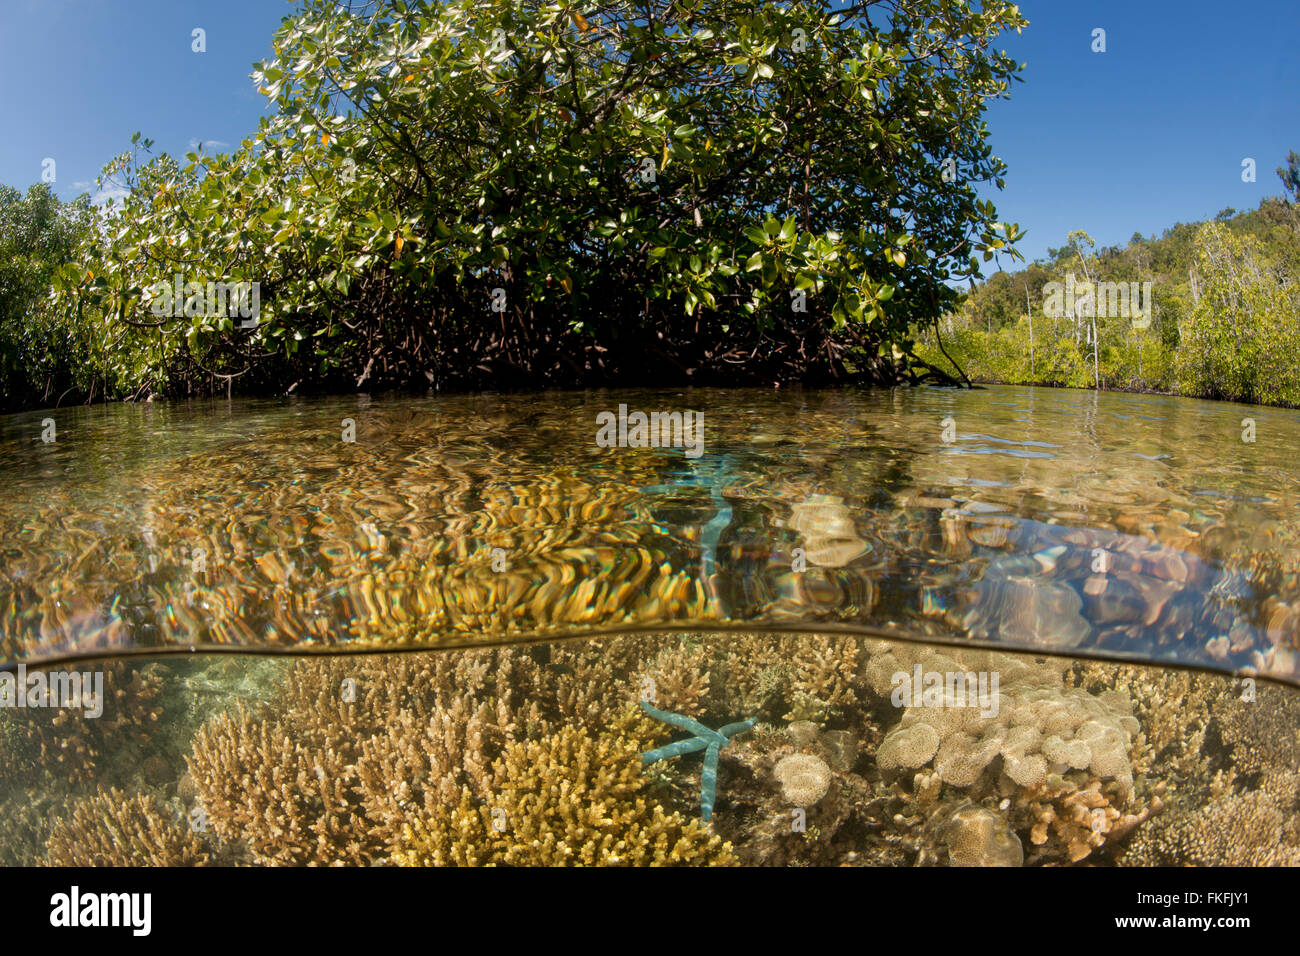 Split level of a shallow coral reef and mangroves. North Raja Ampat, West Papua, Indonesia Stock Photo